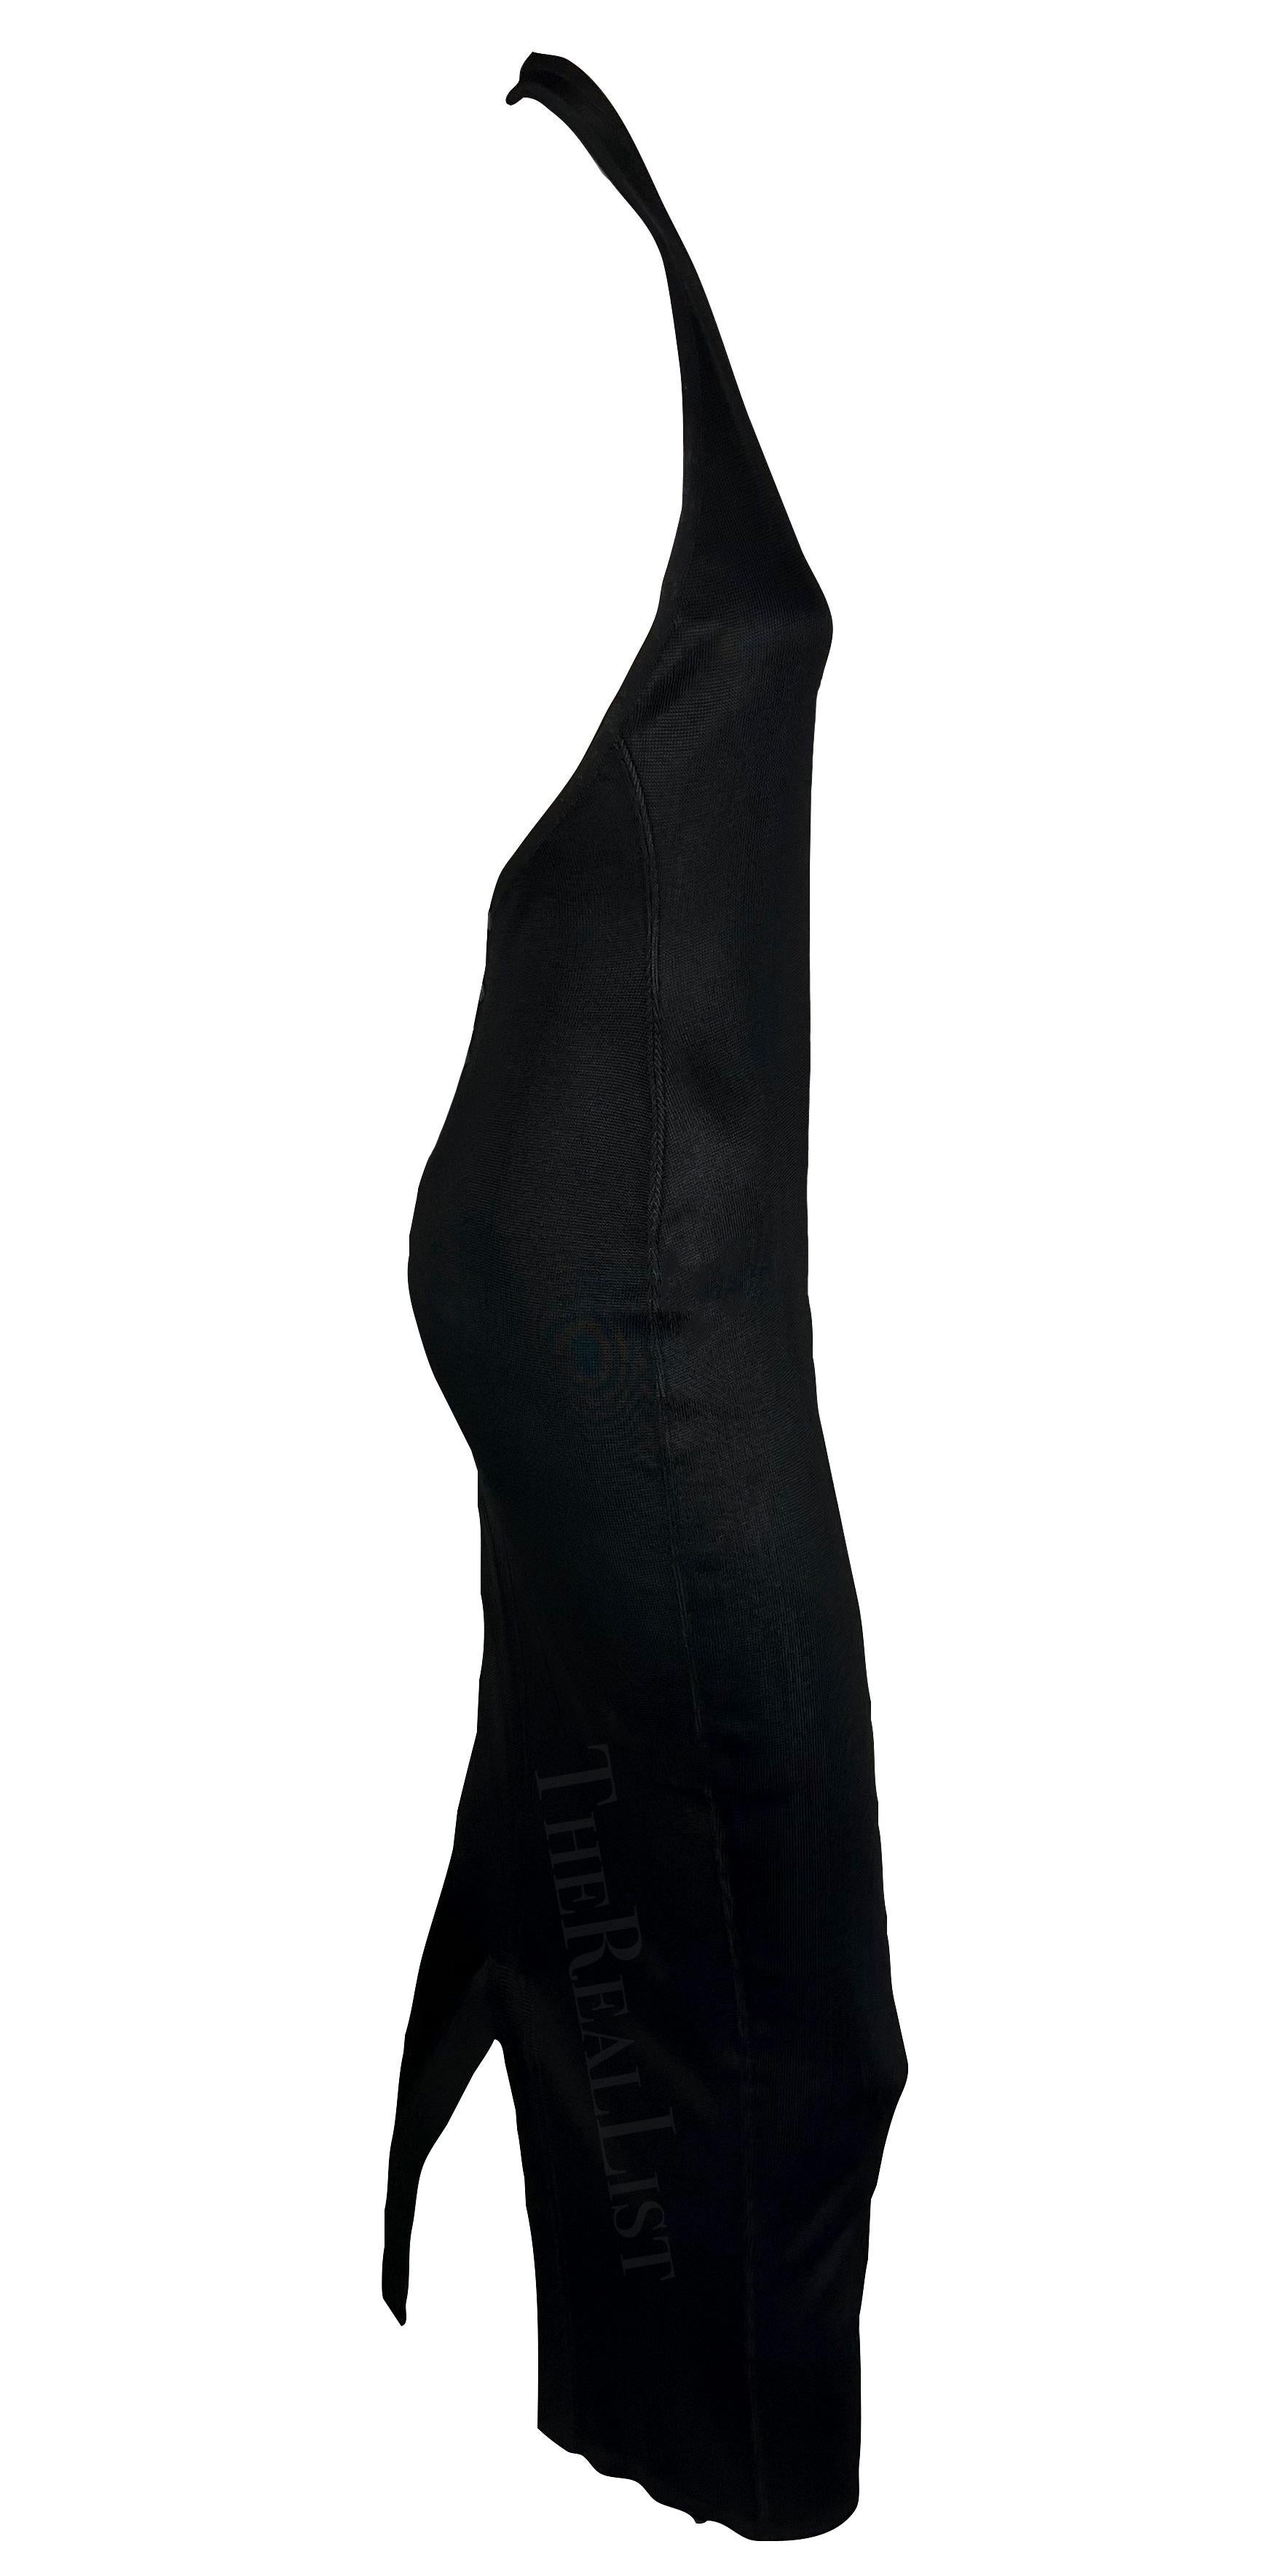 S/S 1986 Azzedine Alaïa Black Knit Halter Neck Bodycon Backless Dress In Excellent Condition For Sale In West Hollywood, CA